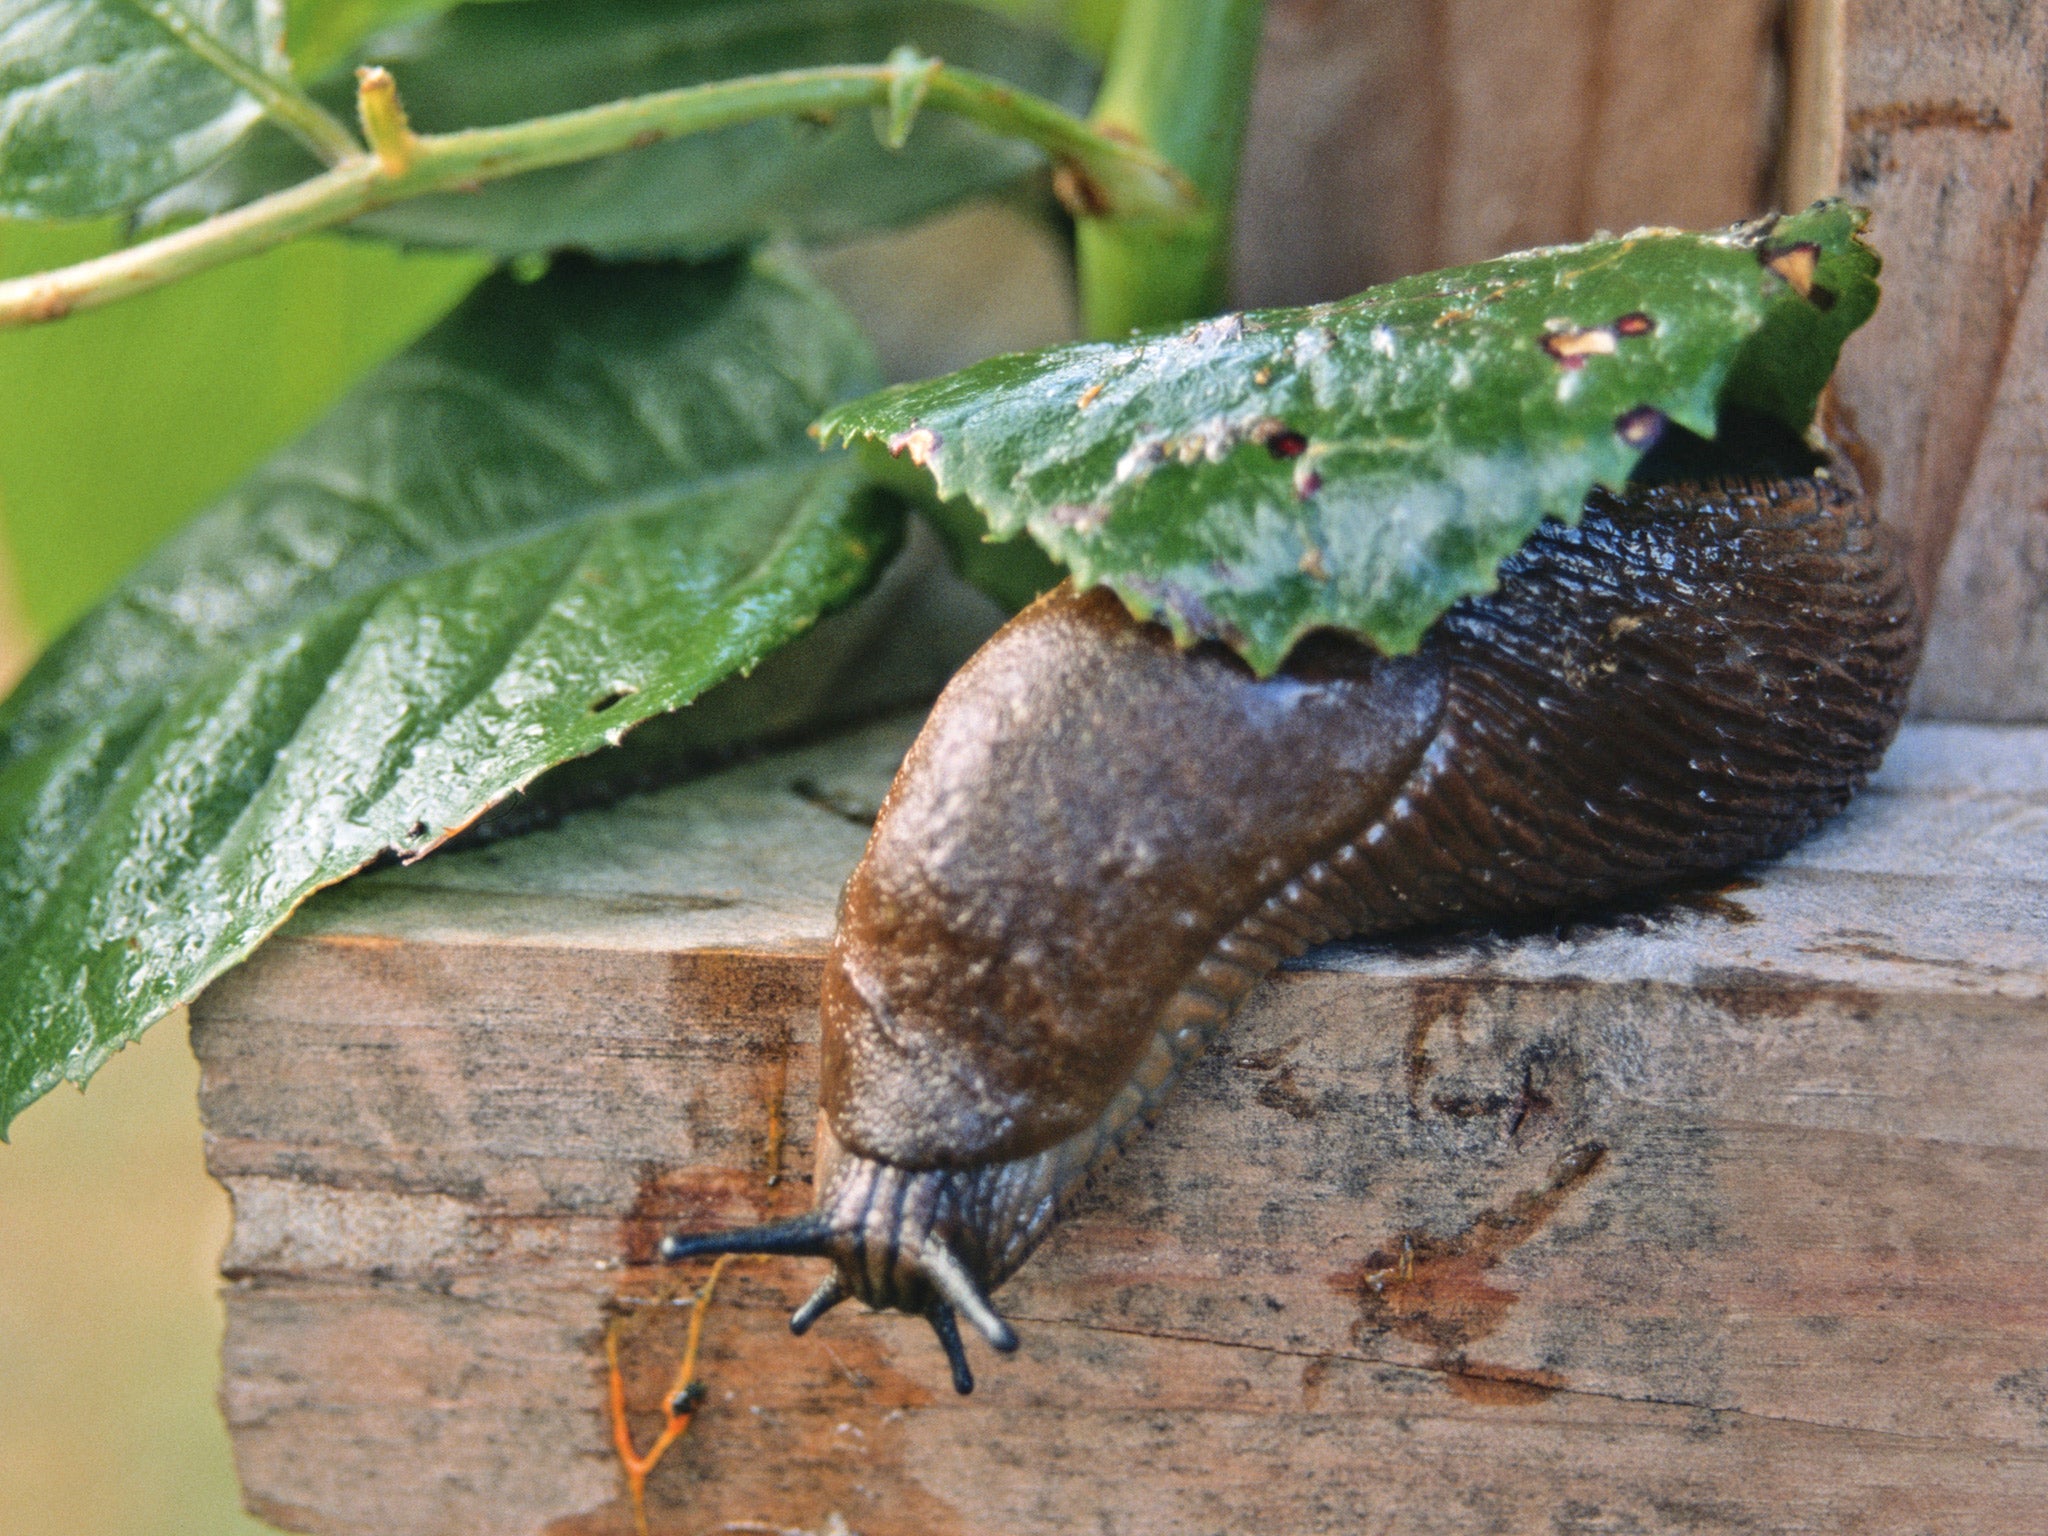 Each cubic metre of garden in Britain could currently contain up to 200 slugs